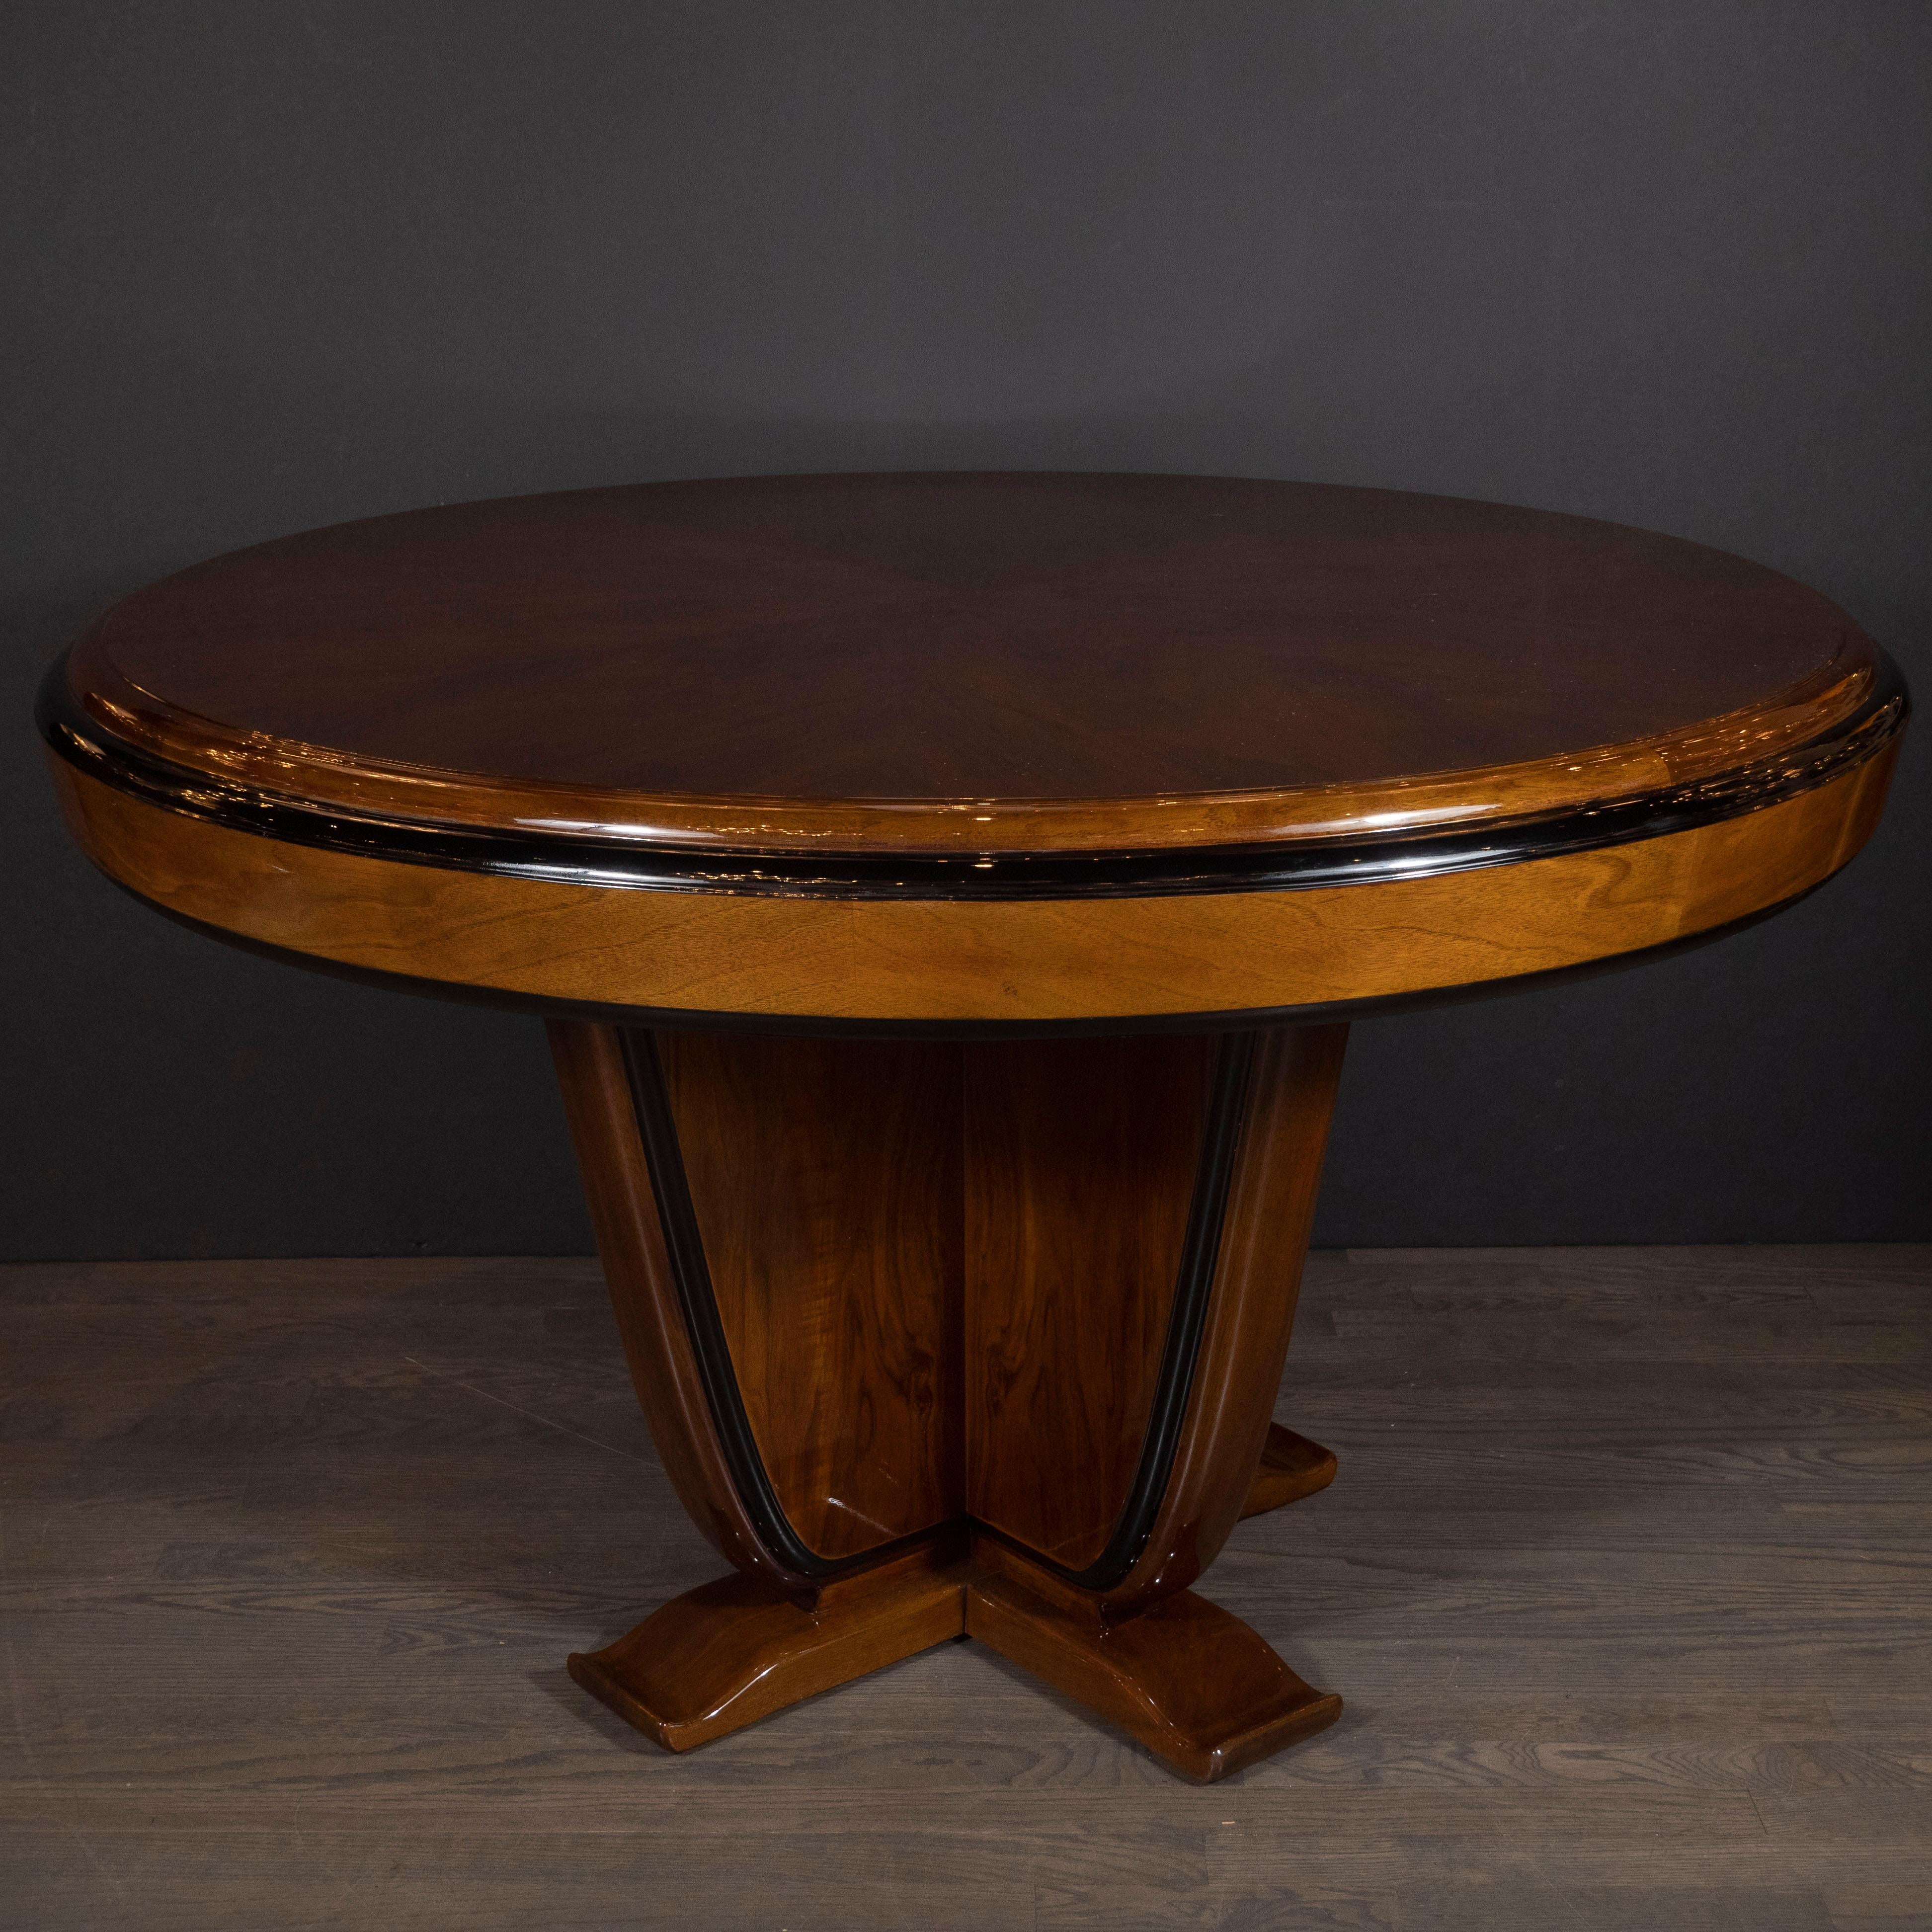 Art Deco Skyscraper Style Bookmatched Walnut & Black Lacquer Dining/Centre Table In Excellent Condition For Sale In New York, NY